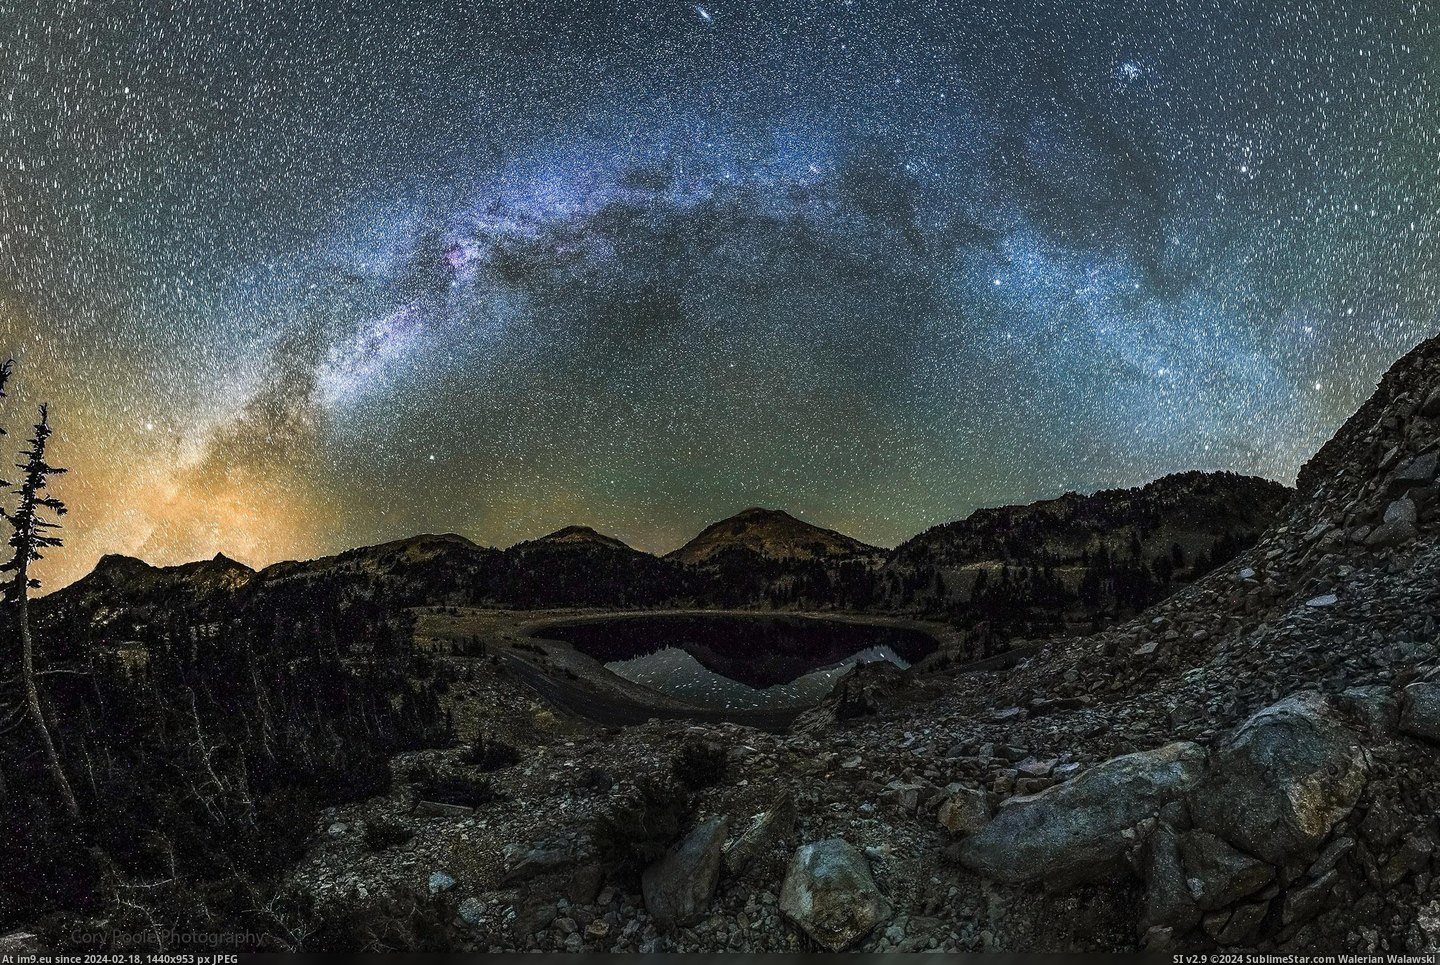 #Park #National #Lake #California #Volcanic #Lassen #Helen #Way #Northern #Arches #Milky [Earthporn] The Milky Way arches over Mt. Lassen and Lake Helen in Lassen Volcanic National Park in Northern California. [2500x1 Pic. (Obraz z album My r/EARTHPORN favs))